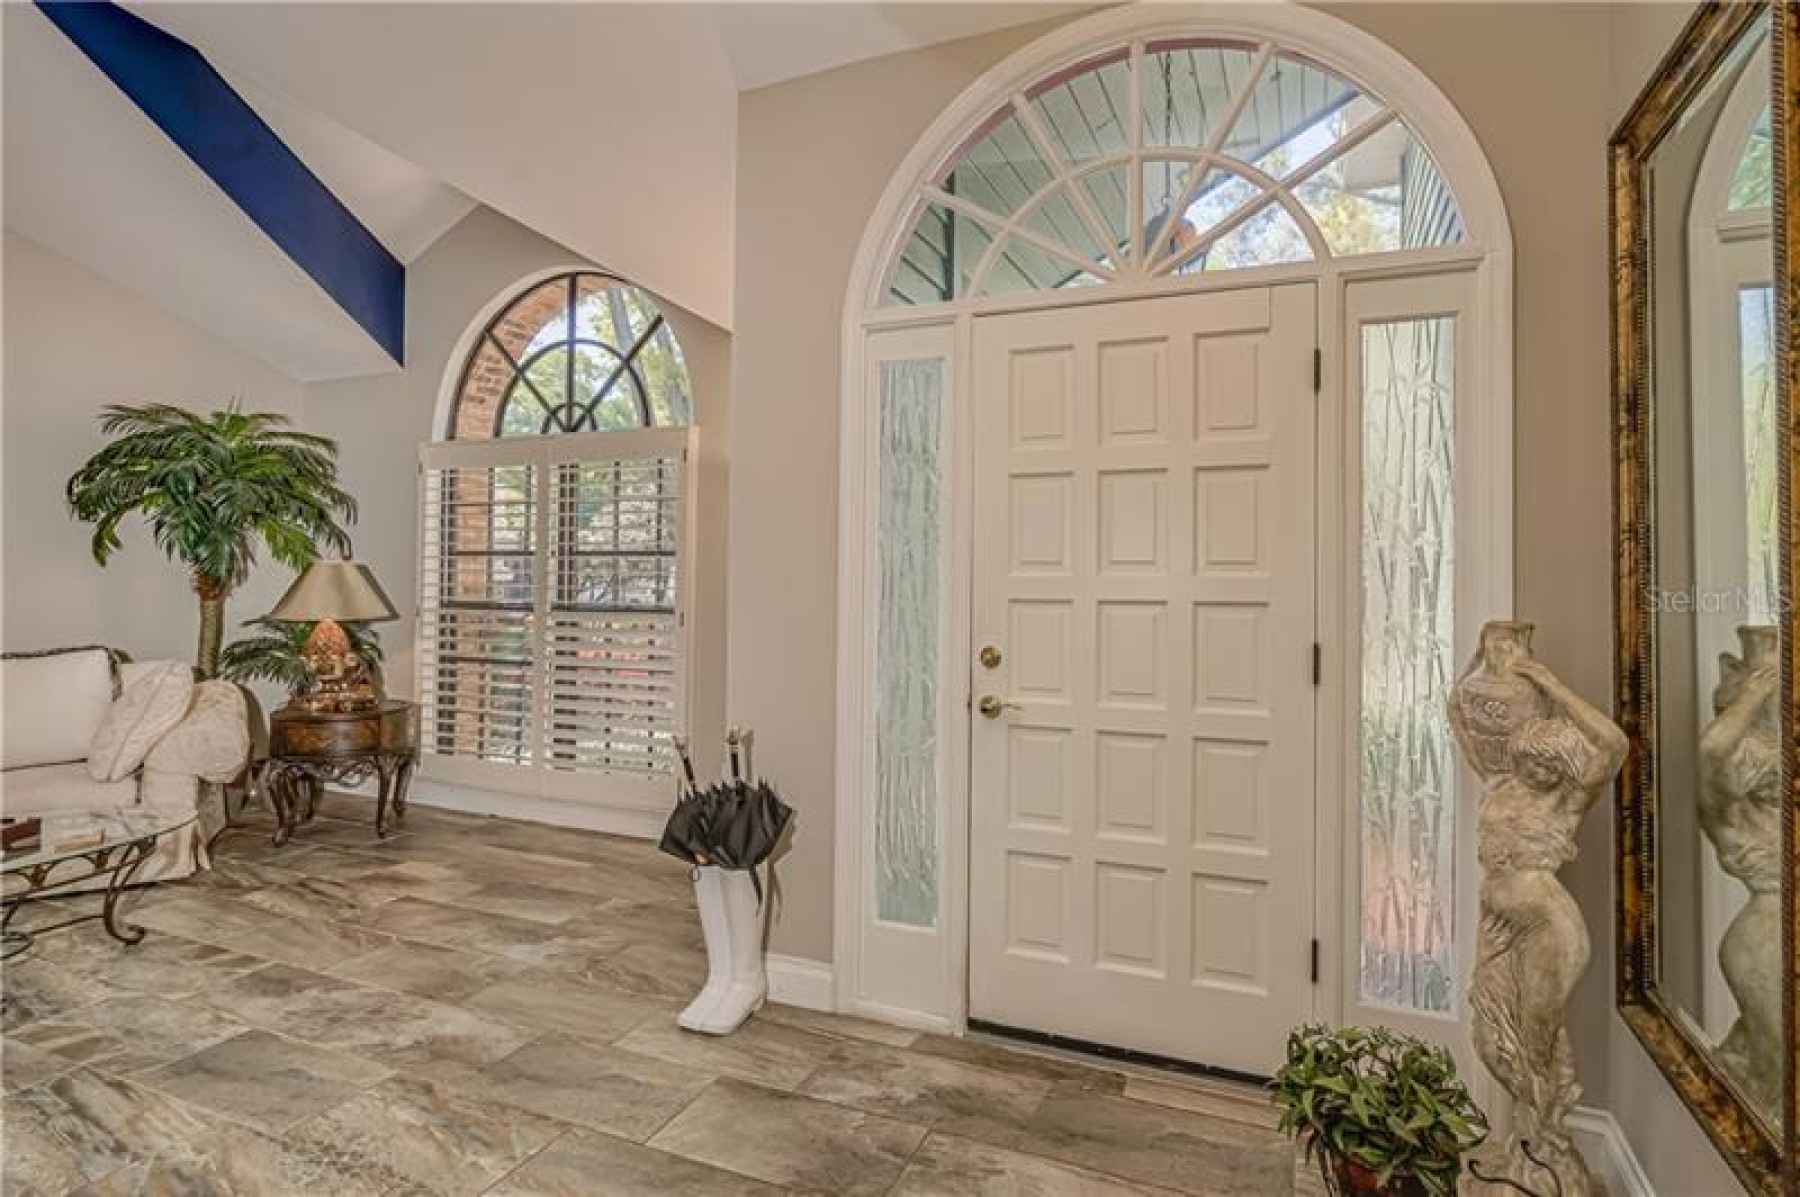 LARGE FOYER OPEN TO LIVING ROOM AND KITCHEN